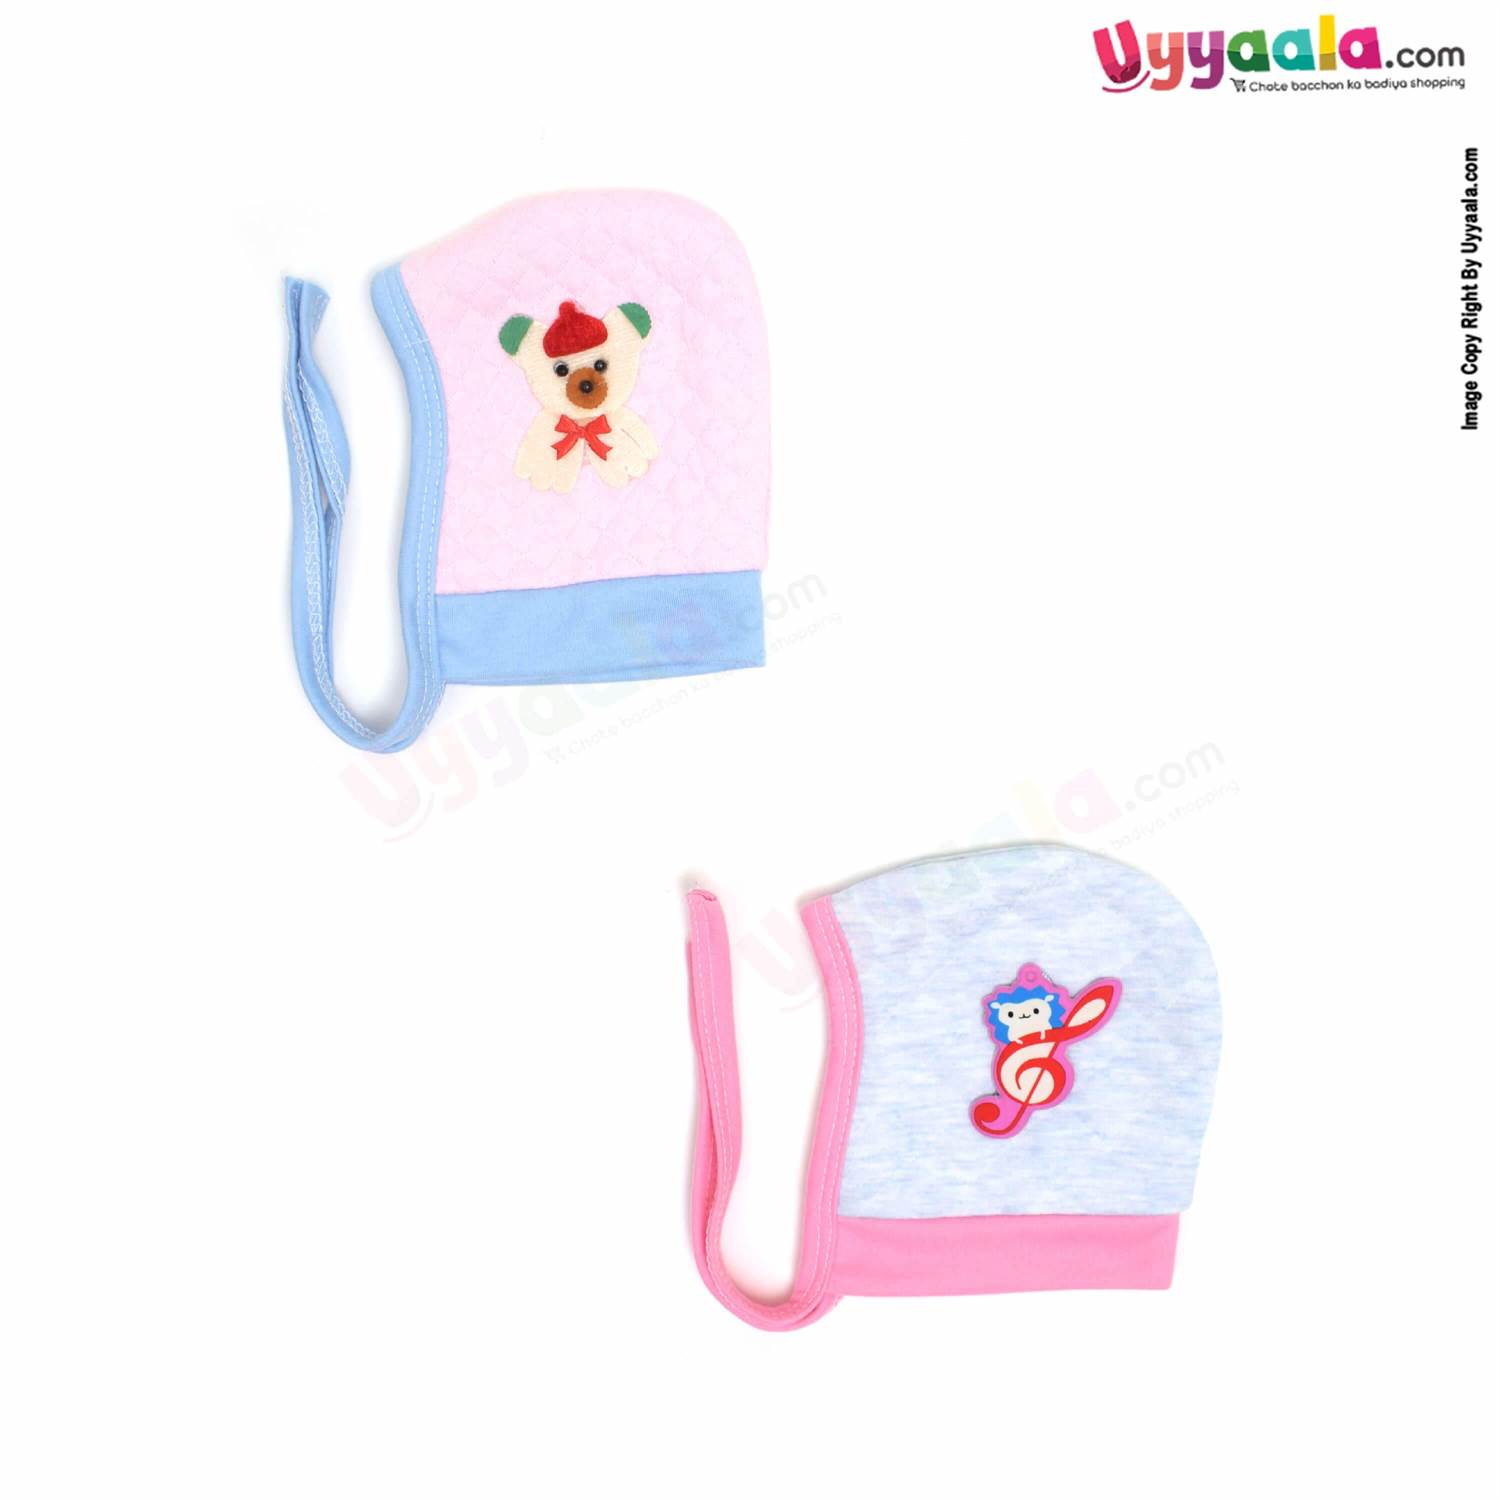 Side Tying Soft Hosiery Cotton Caps for Babies with Teddy Bear & Musical Note Patch Pack of 2, 0-6m age- Pink & Sky Blue